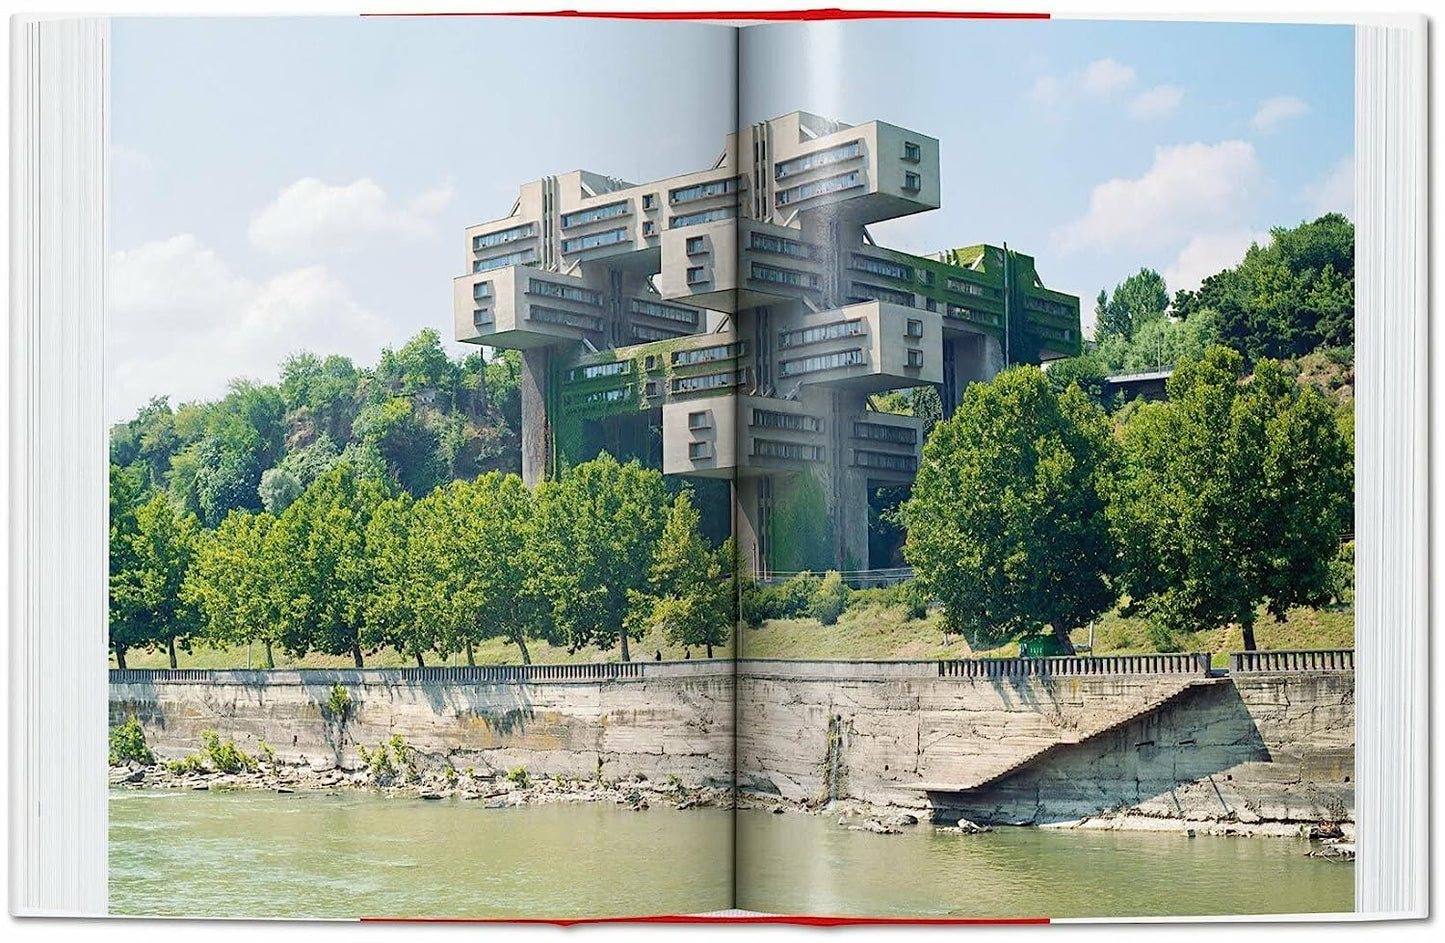 CCCP. Cosmic Communist Constructions Photographed. 40th Ed.